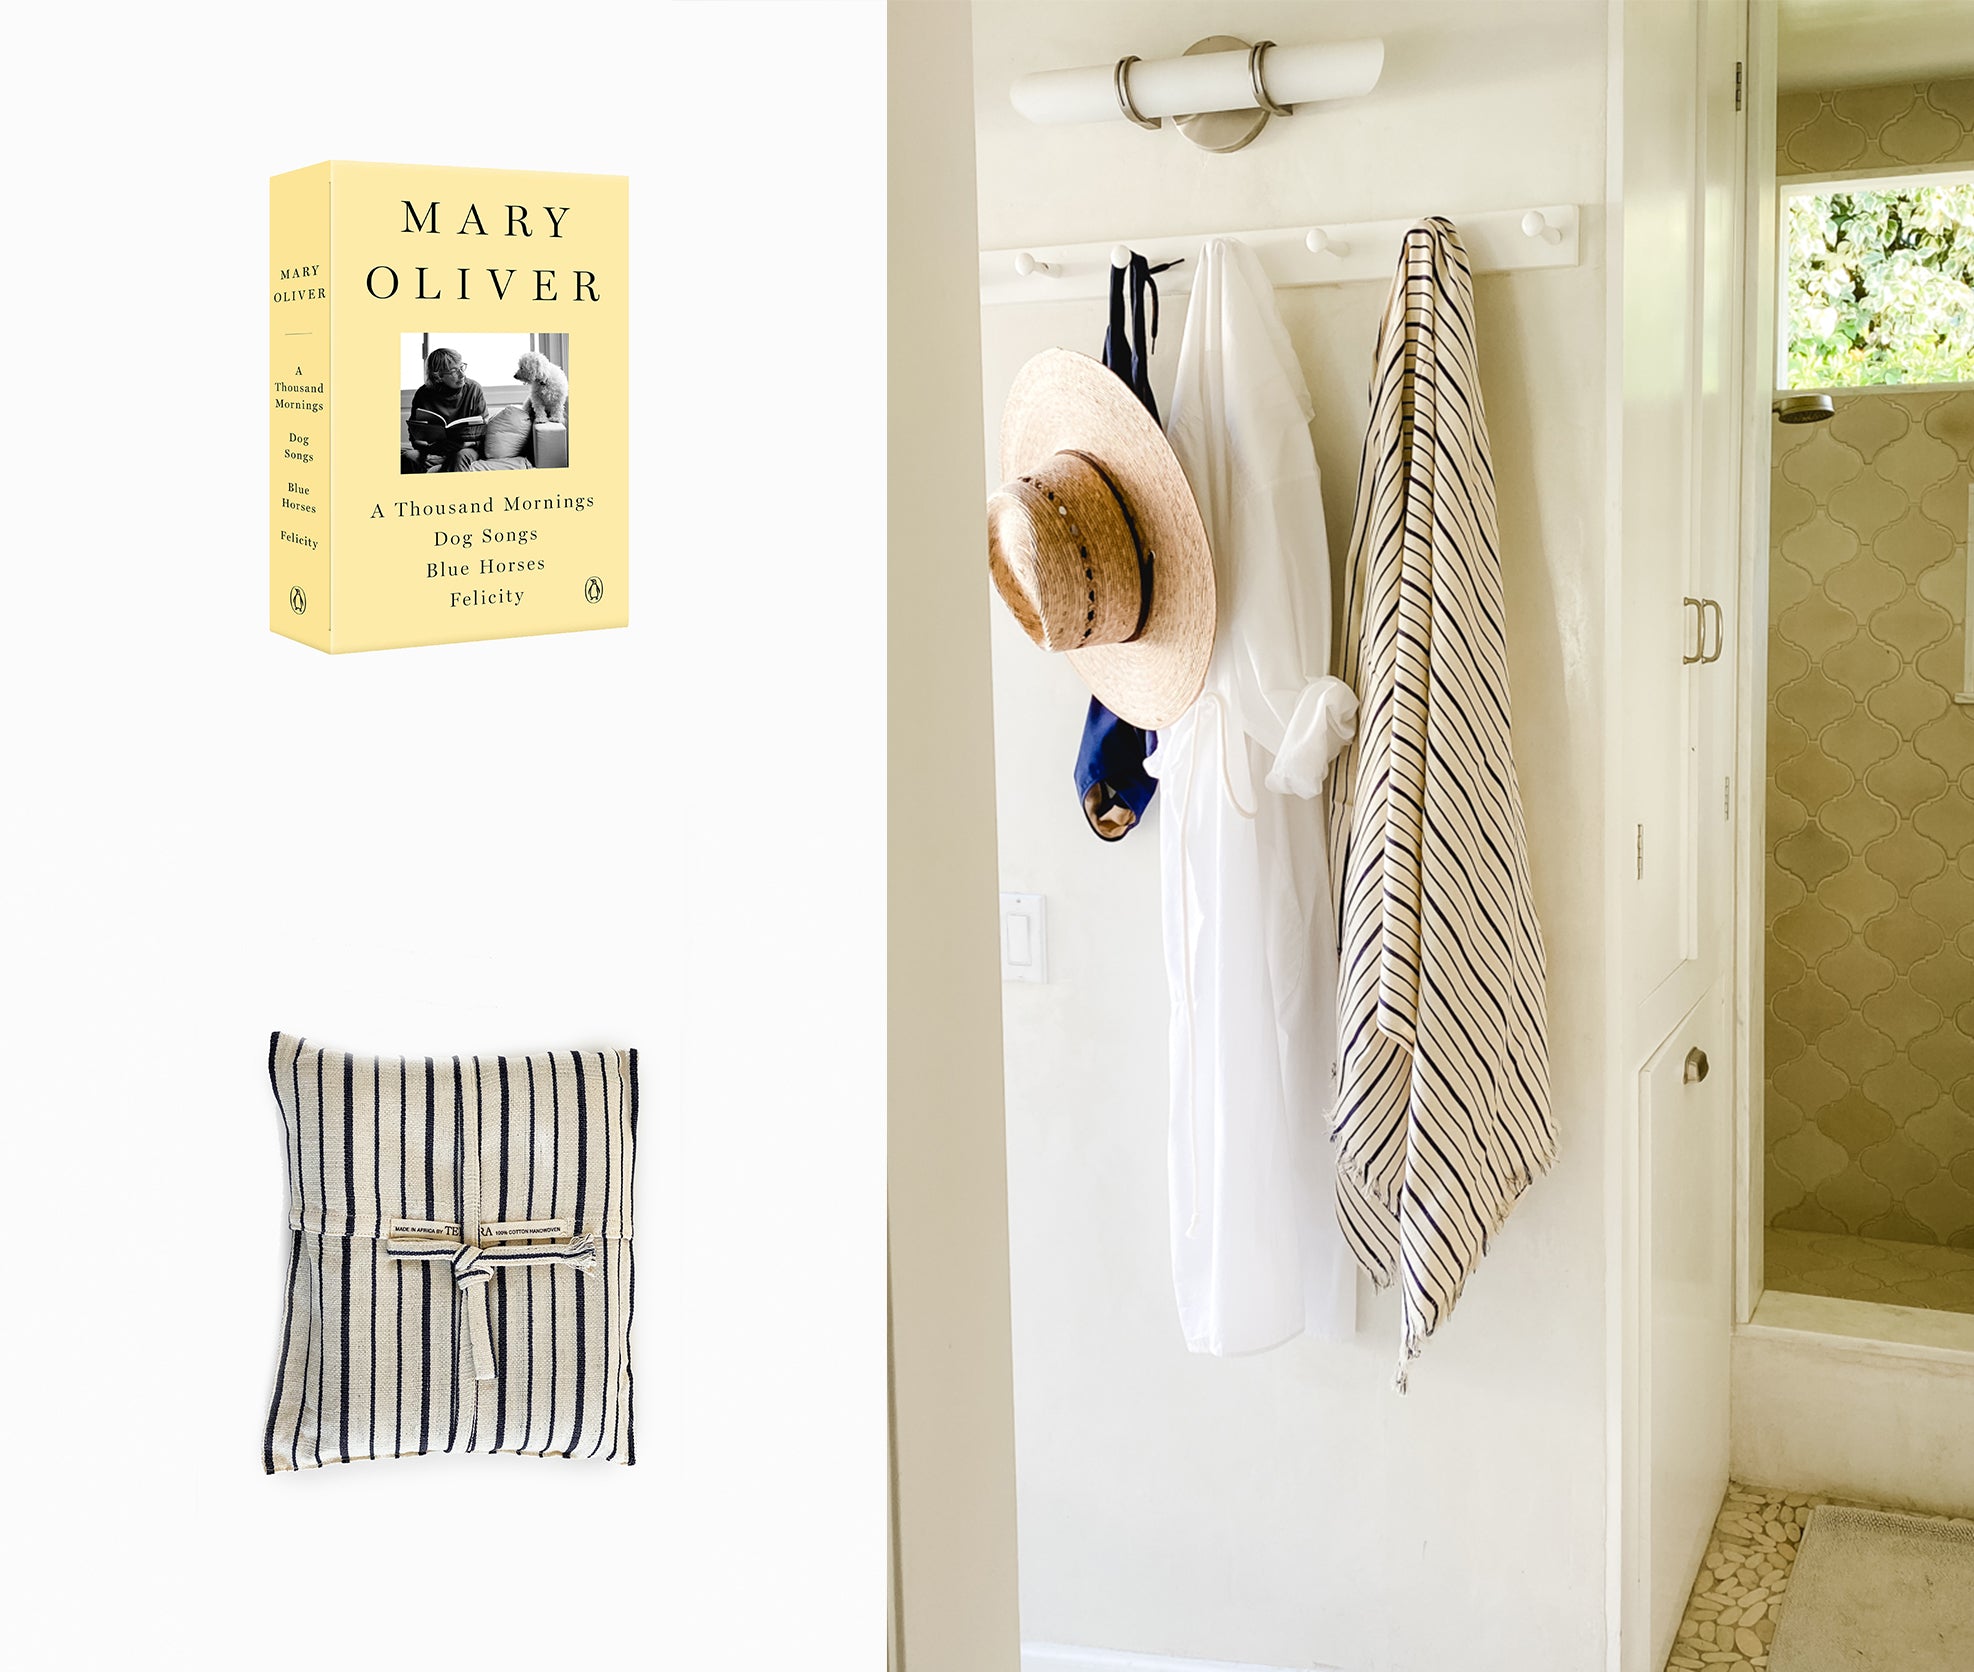 A Mary Oliver Collection and Tensira Fringed Towel